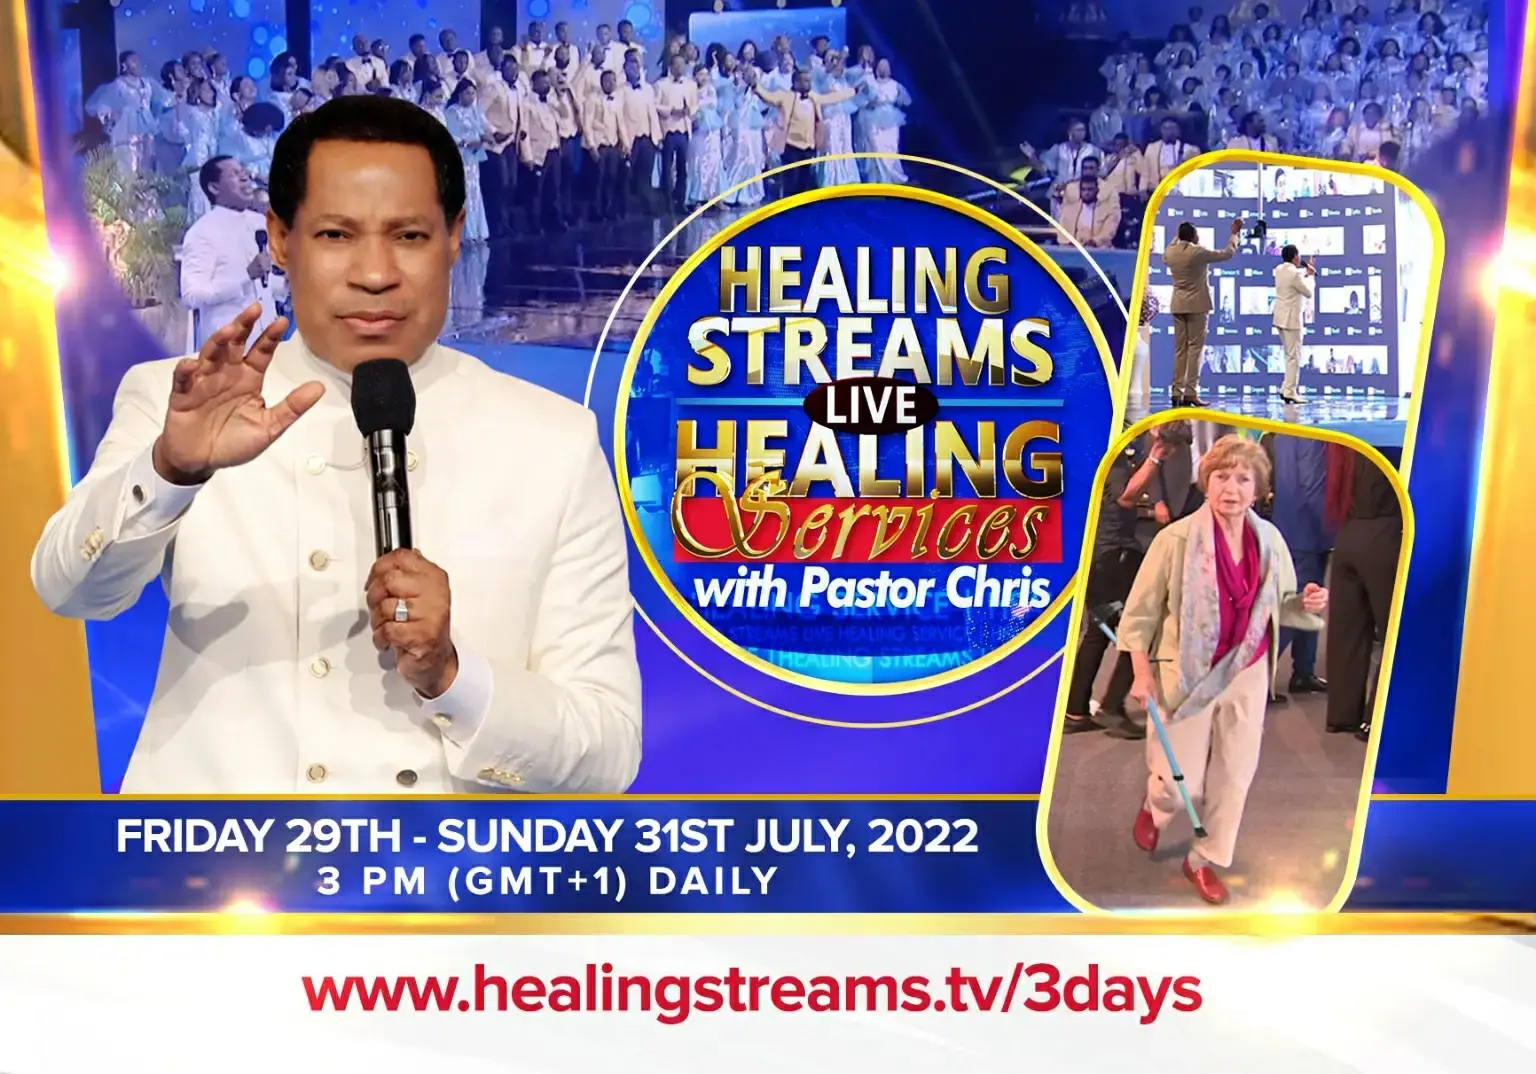 LOFTY EXPECTATIONS FOR THE HEALING STREAMS LIVE HEALING SERVICES 